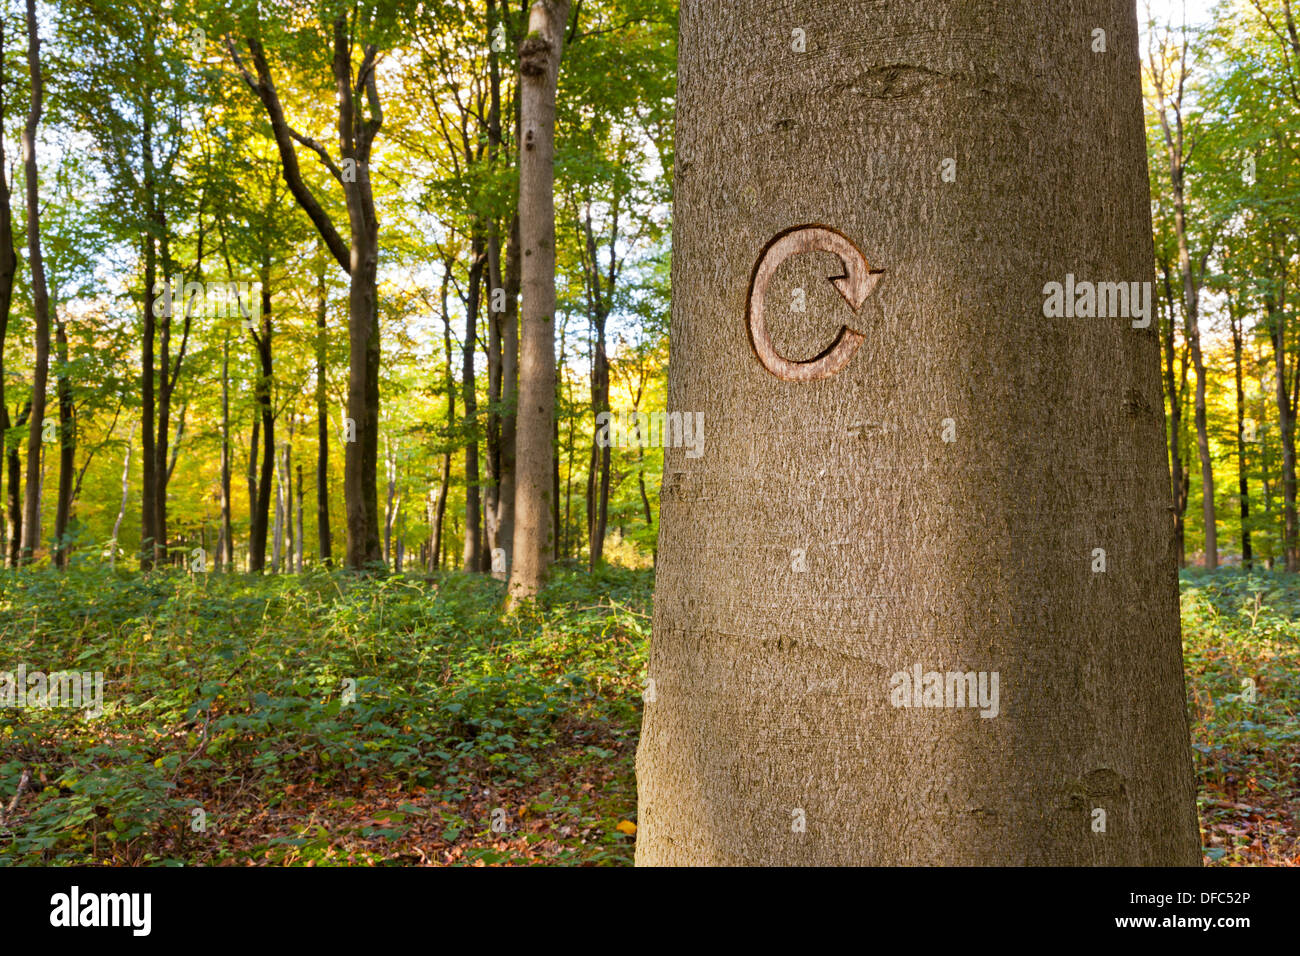 The recycle symbol carved into a tree in managed woodland. Stock Photo